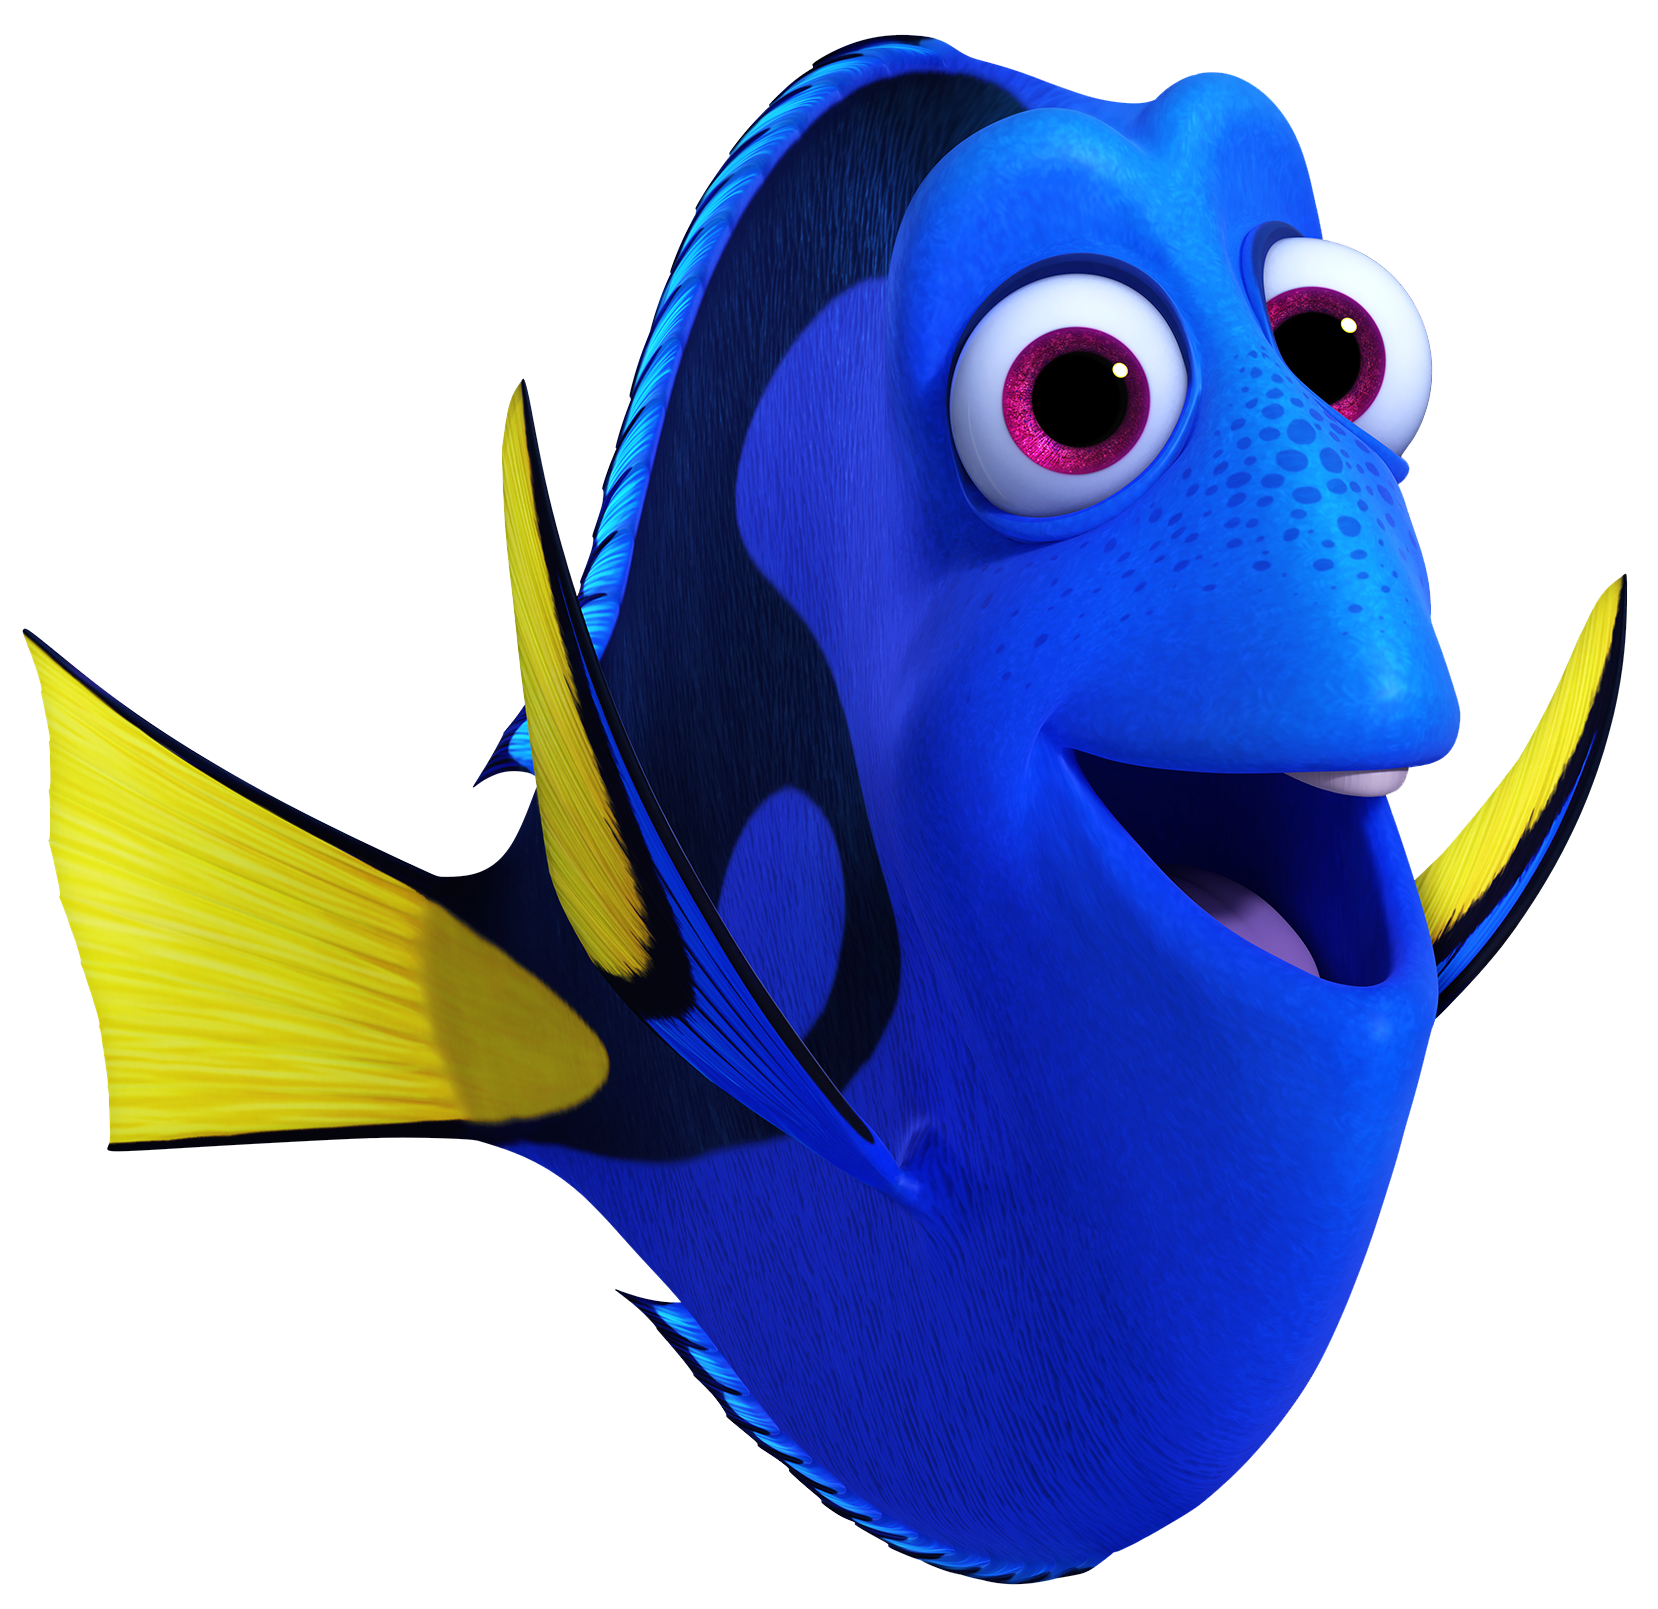 Finding Dory download